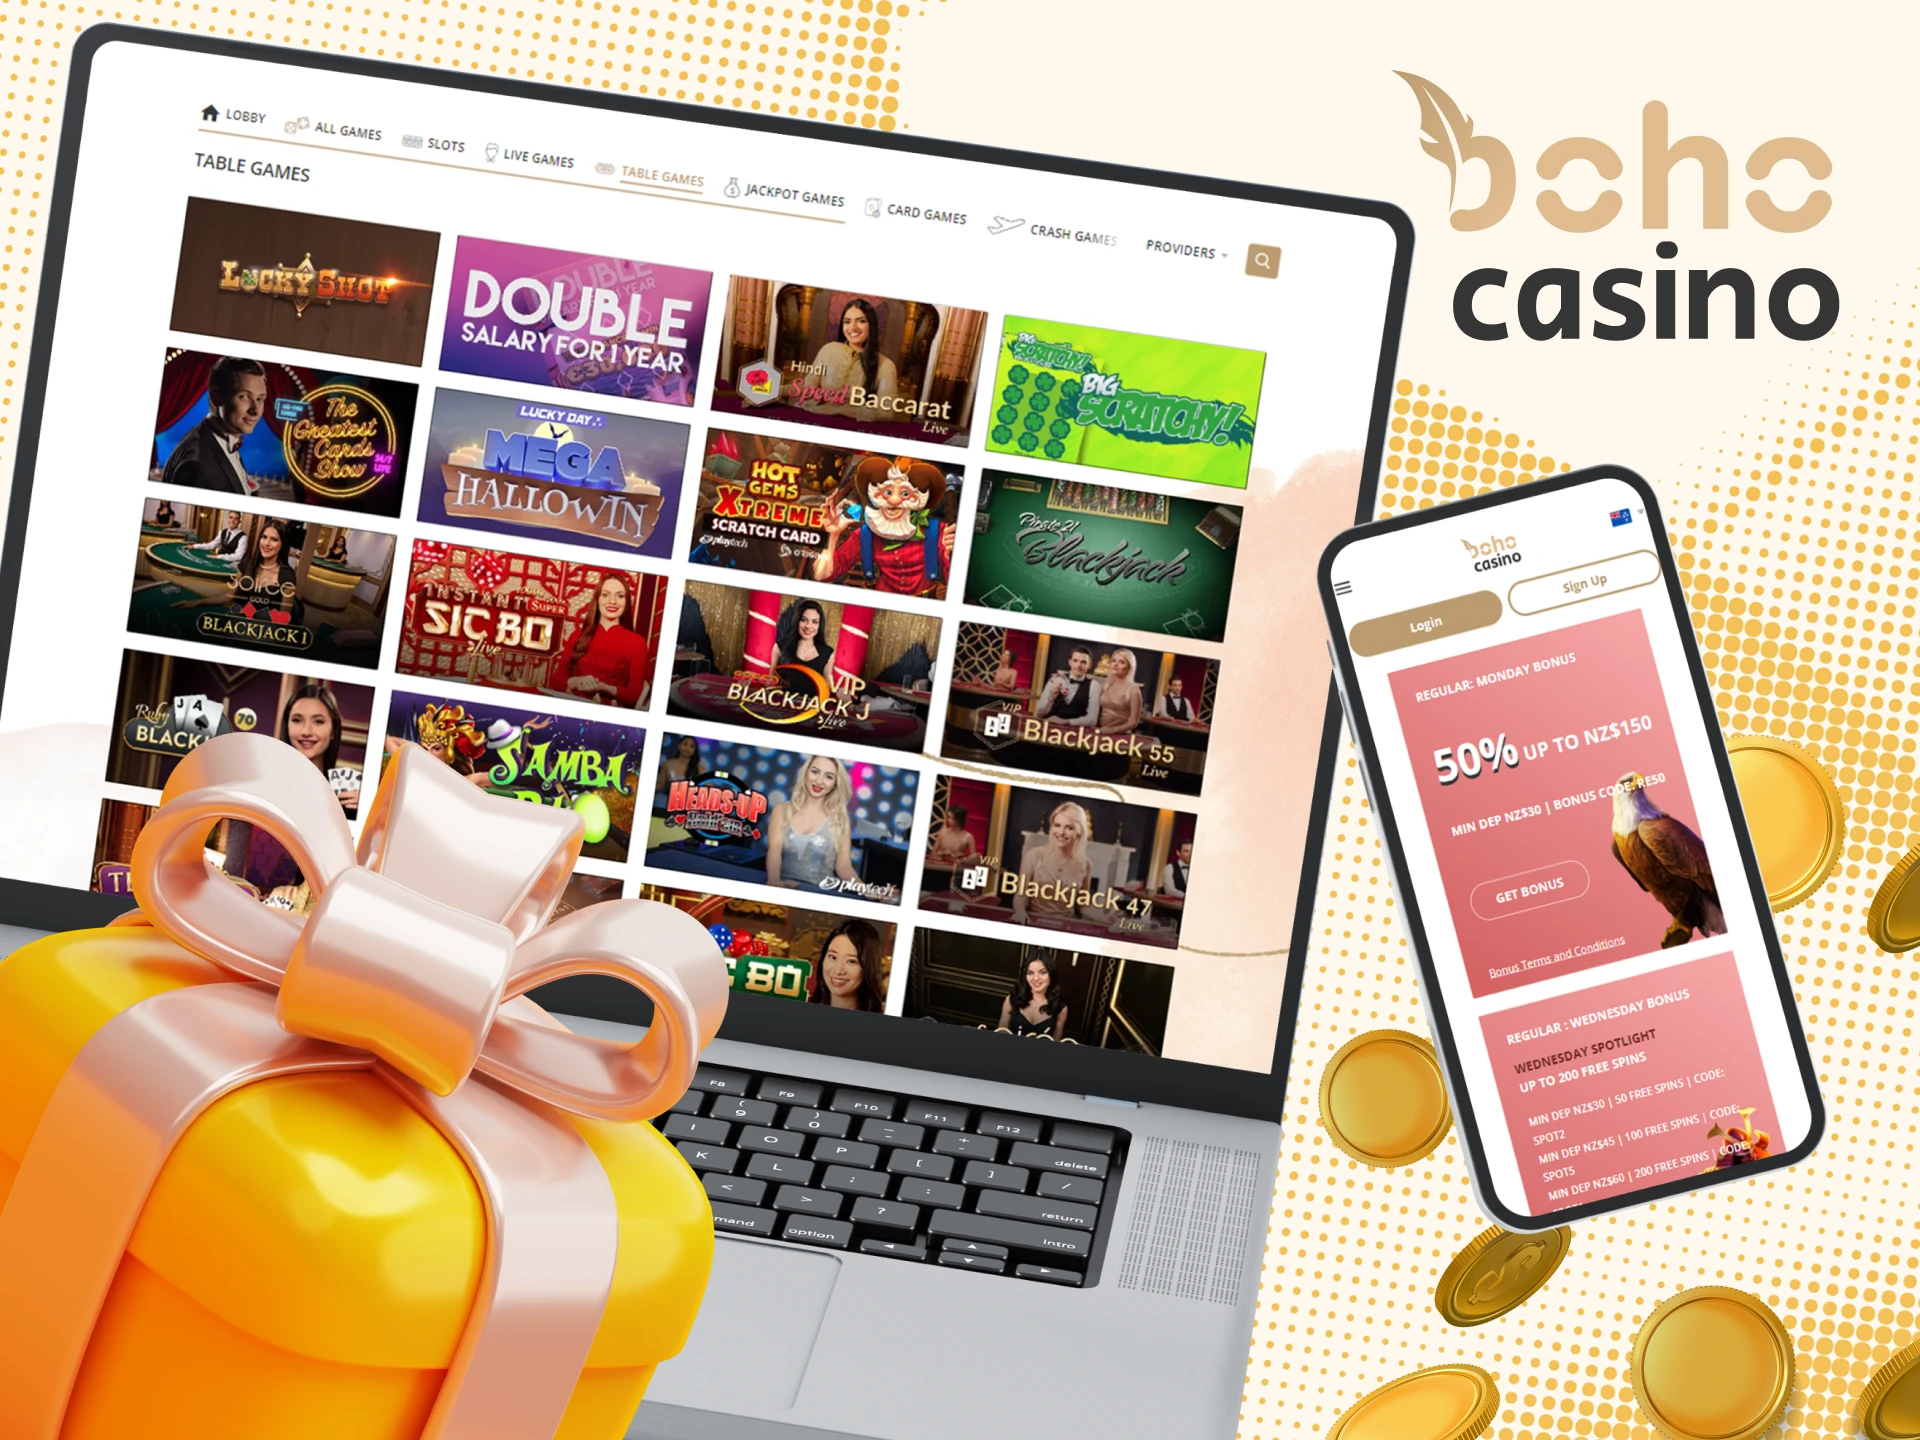 There are many Boho Casino's active bonus offers for table games.